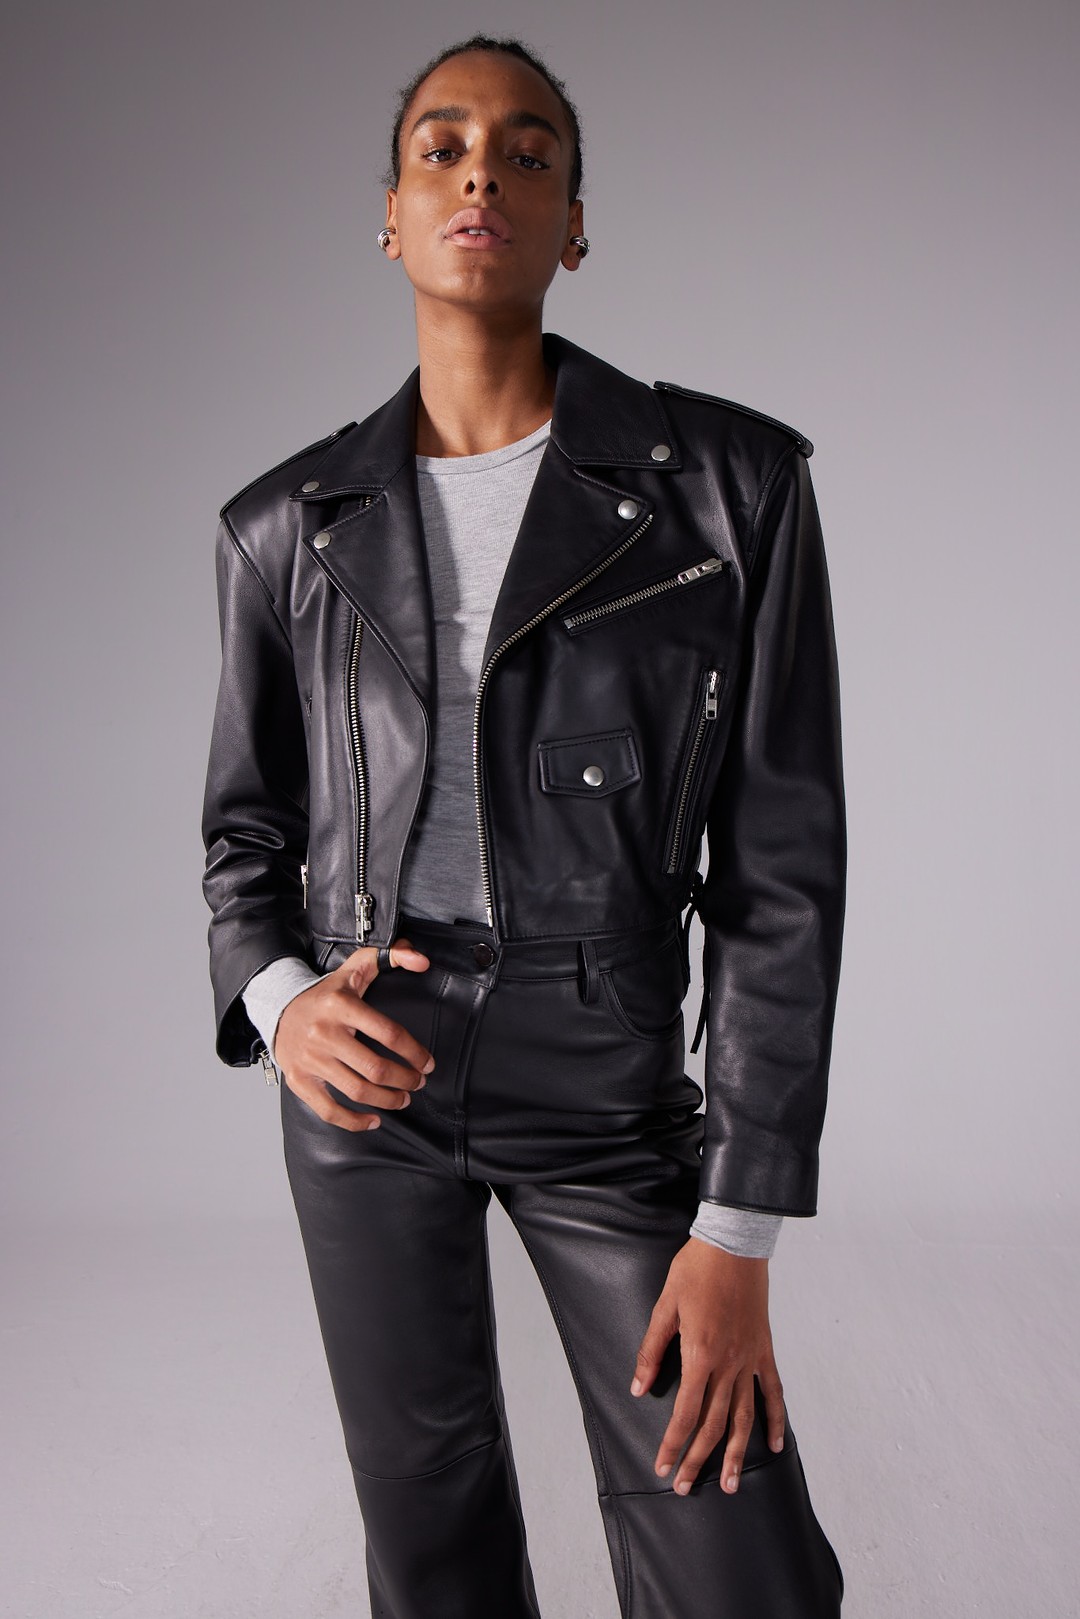 NEWYORK Gang Mat Black With Metal Accessory Leather Jacket